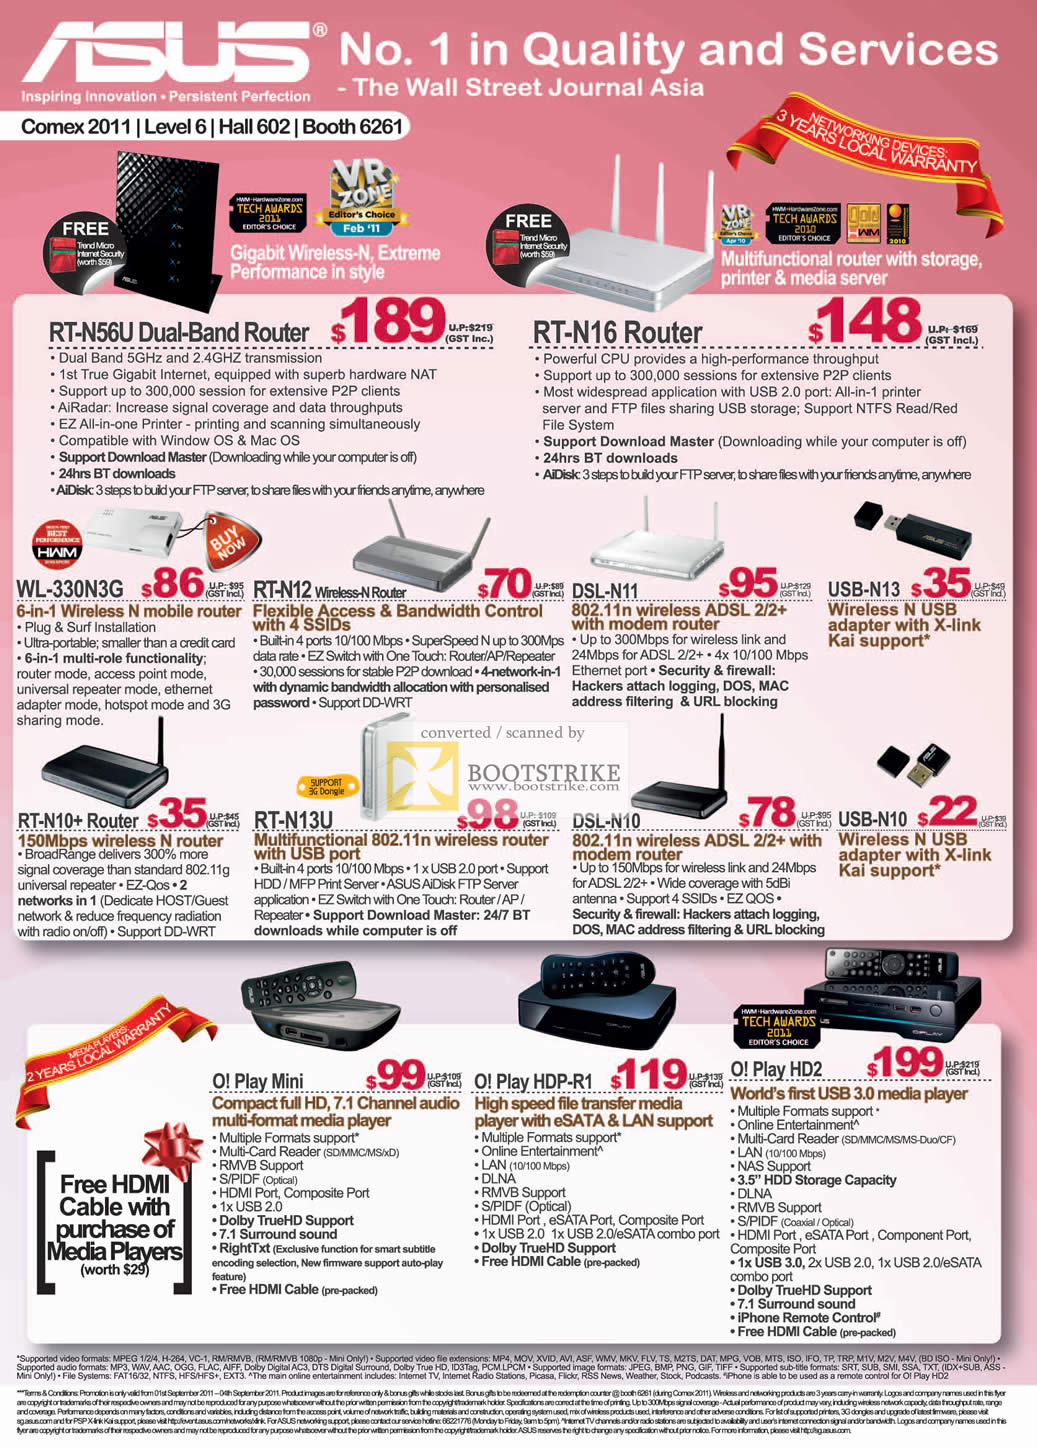 COMEX 2011 price list image brochure of ASUS Networking Router Wireless RT-N56U RT-N16 WL-330N3G RT-N12 DSL-N11 USB-N13 RT-N10 RT-N13U DSL-N10 USB-N10 O Play Mini HDP-R1 HD2 Media Player Adapter